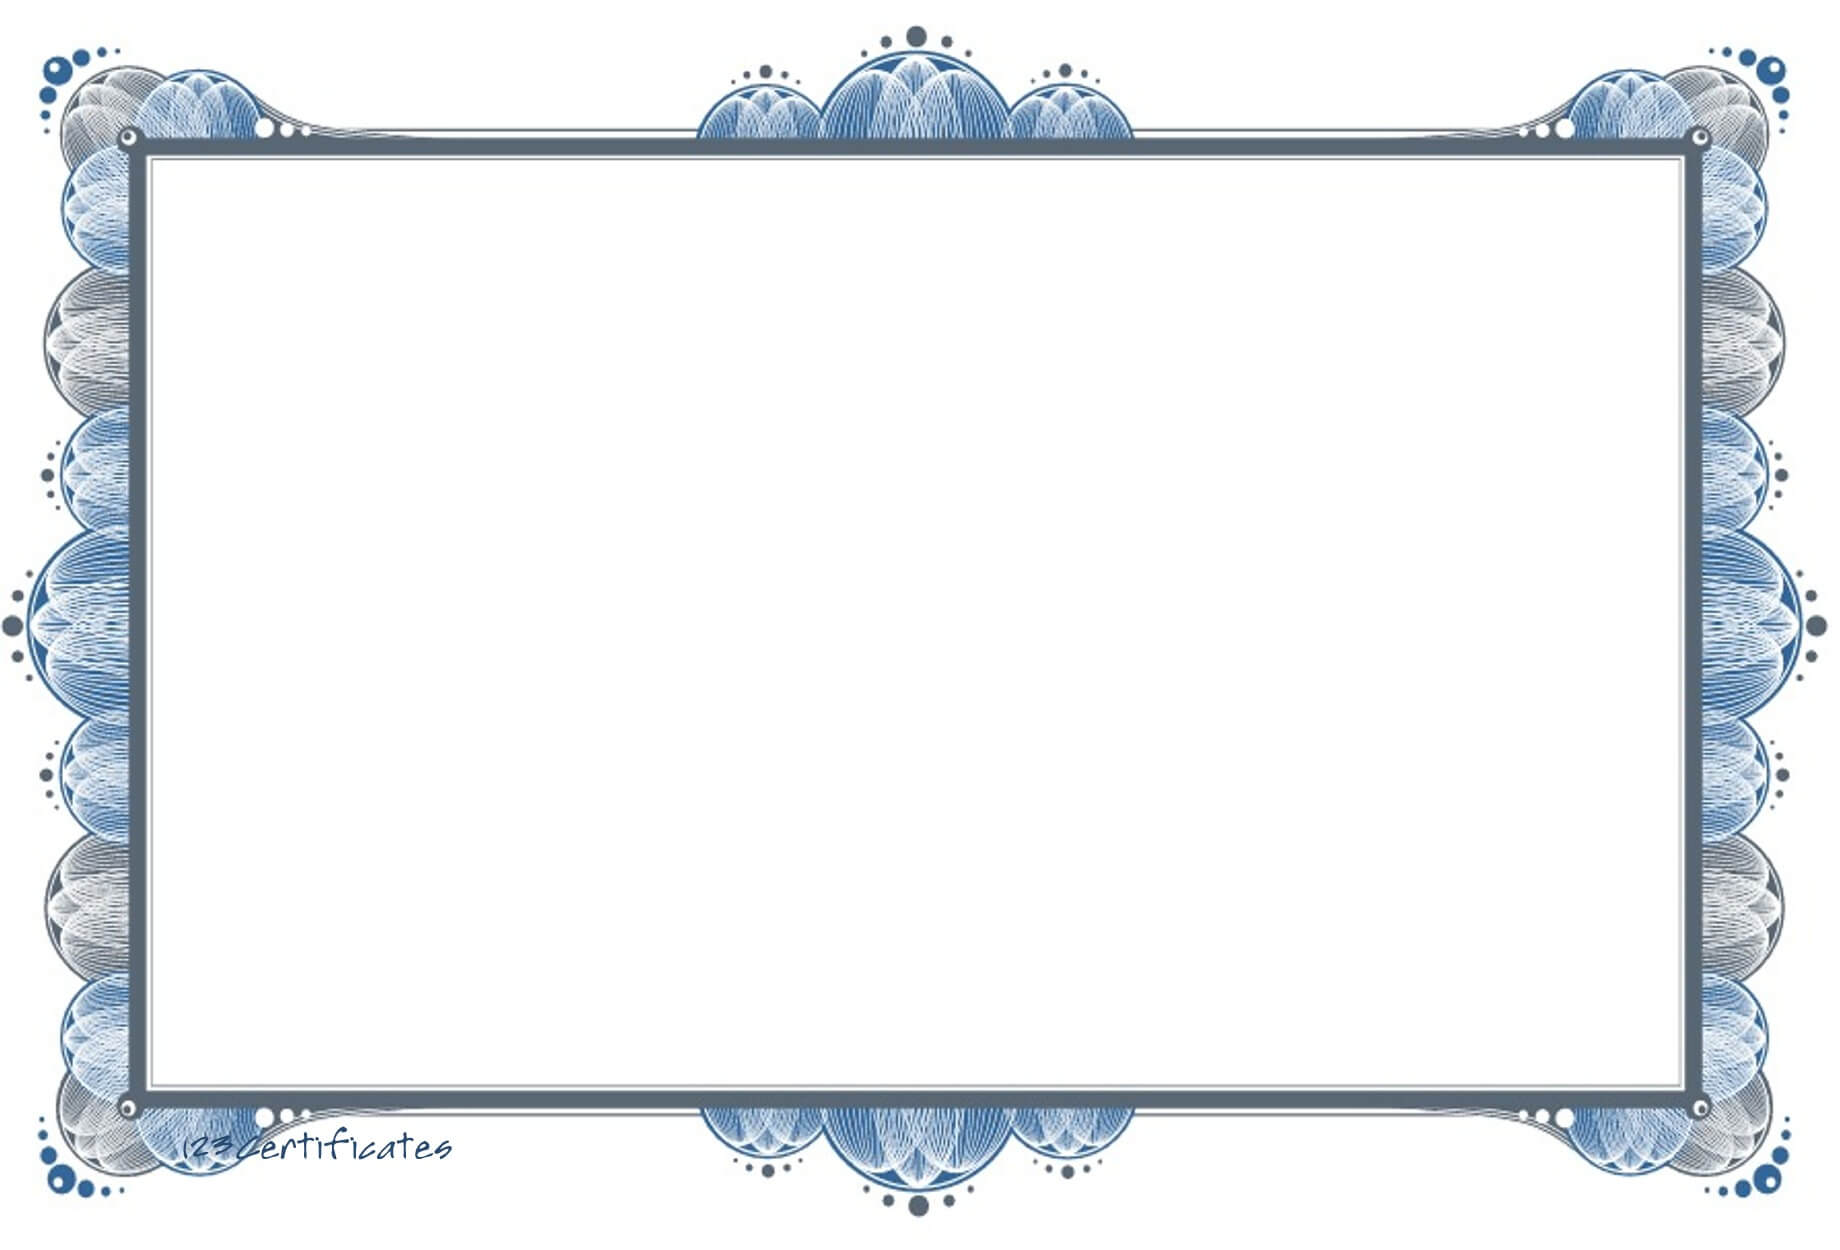 Free Certificate Border, Download Free Clip Art, Free Clip Inside Word Border Templates Free Download